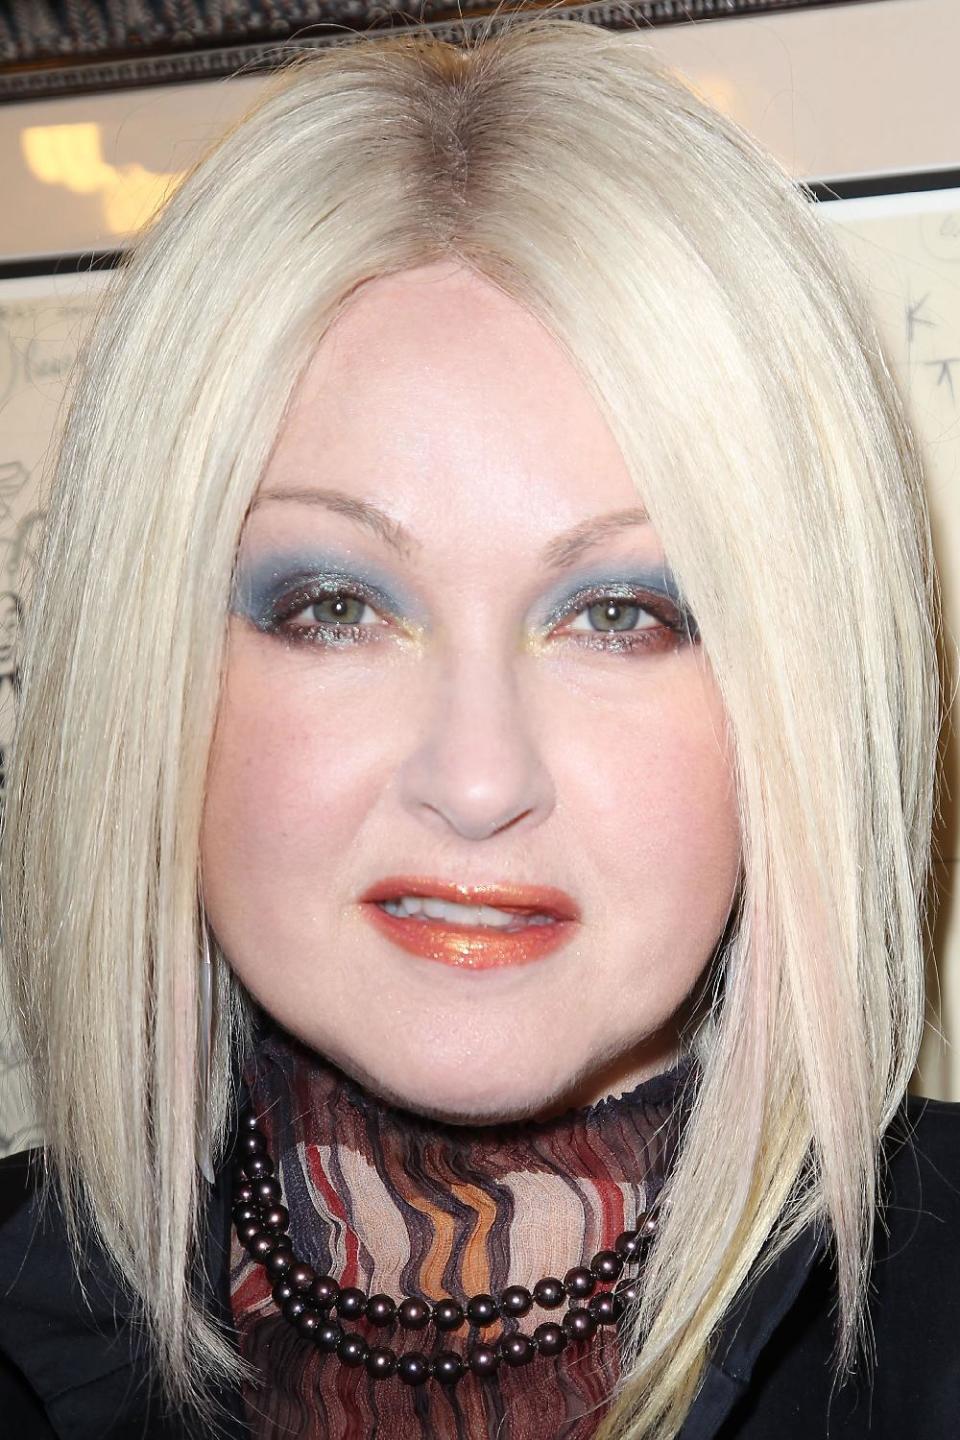 This Feb. 28, 2013 photo released by Starpix shows, Cyndi Lauper at the open house for the Upcoming Musical "Kinky Boots," featuring Music by Cyndi Lauper, at the Al Hirshfeld Theatre in New York. (AP Photo/Starpix, Kristina Bumphrey)